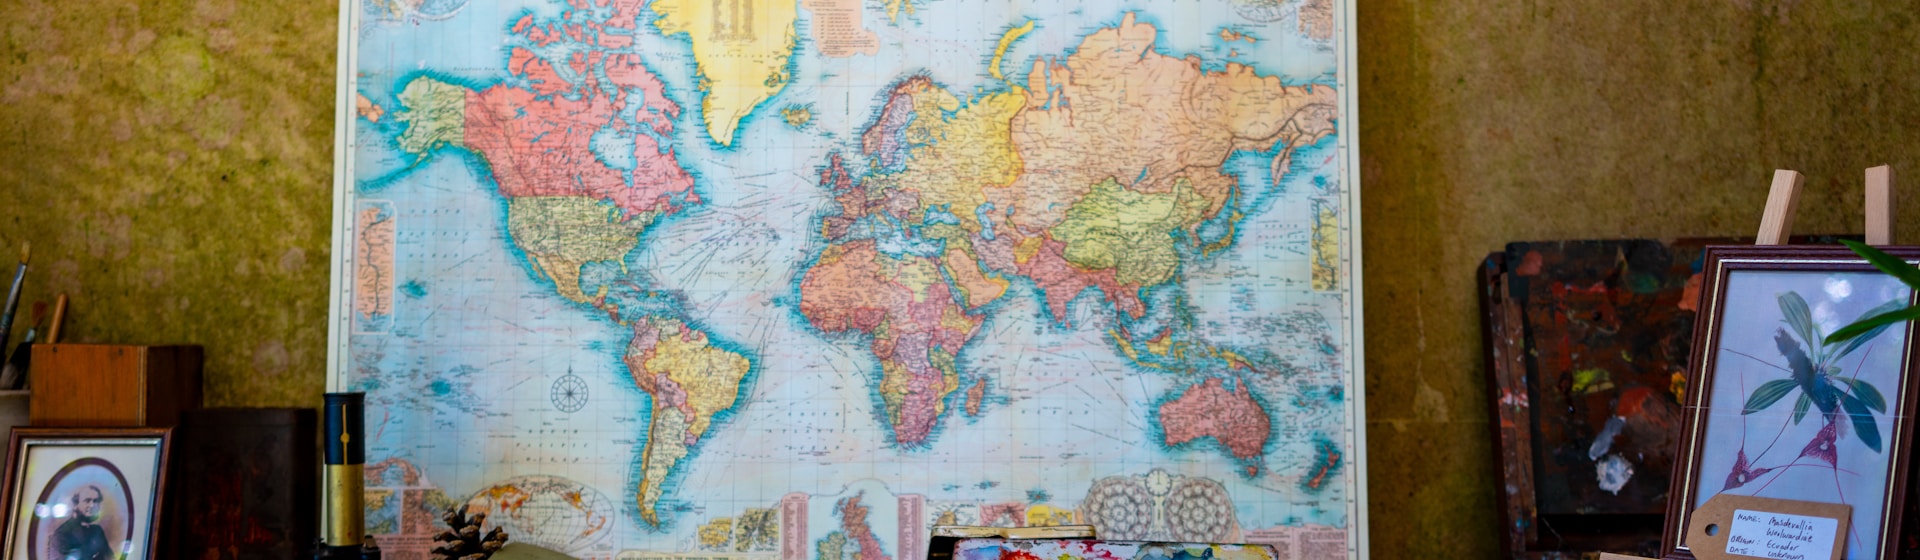 world map poster near book and easel